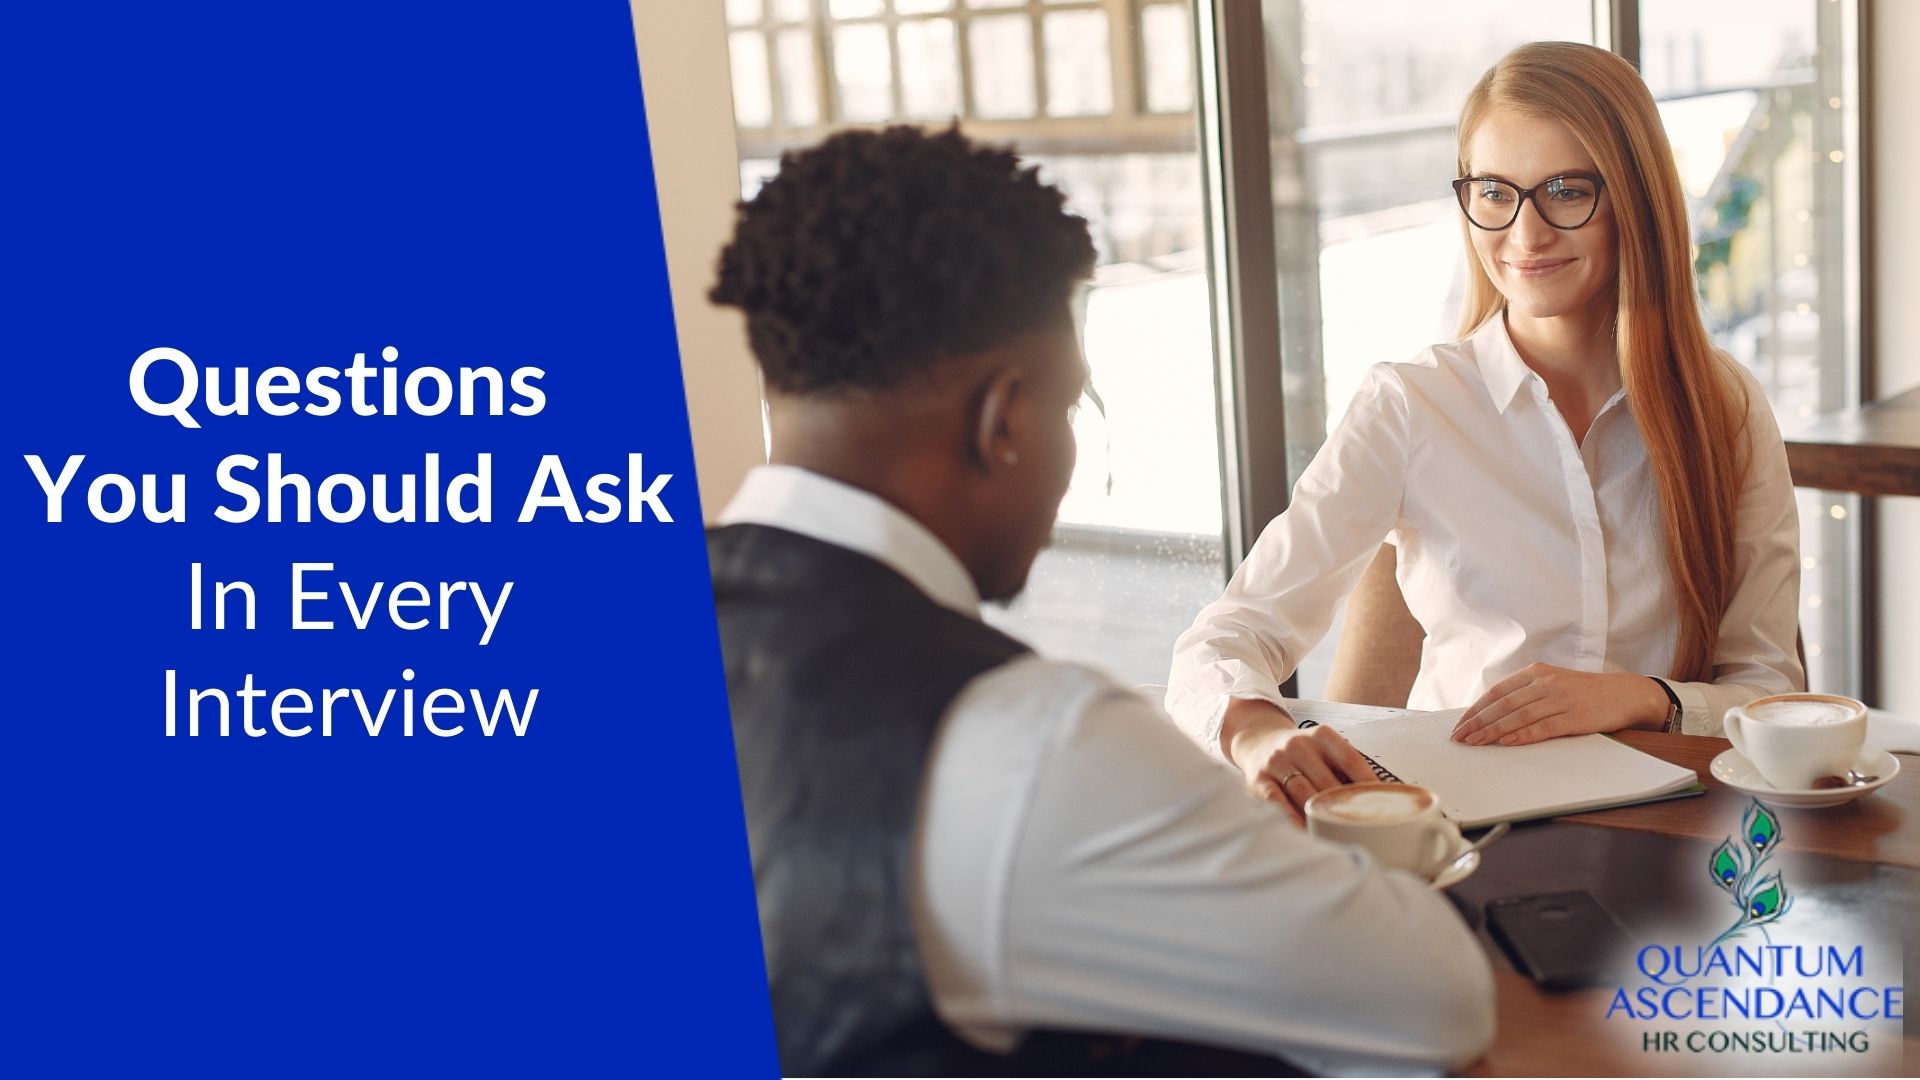 Questions You Should Ask In Every Interview